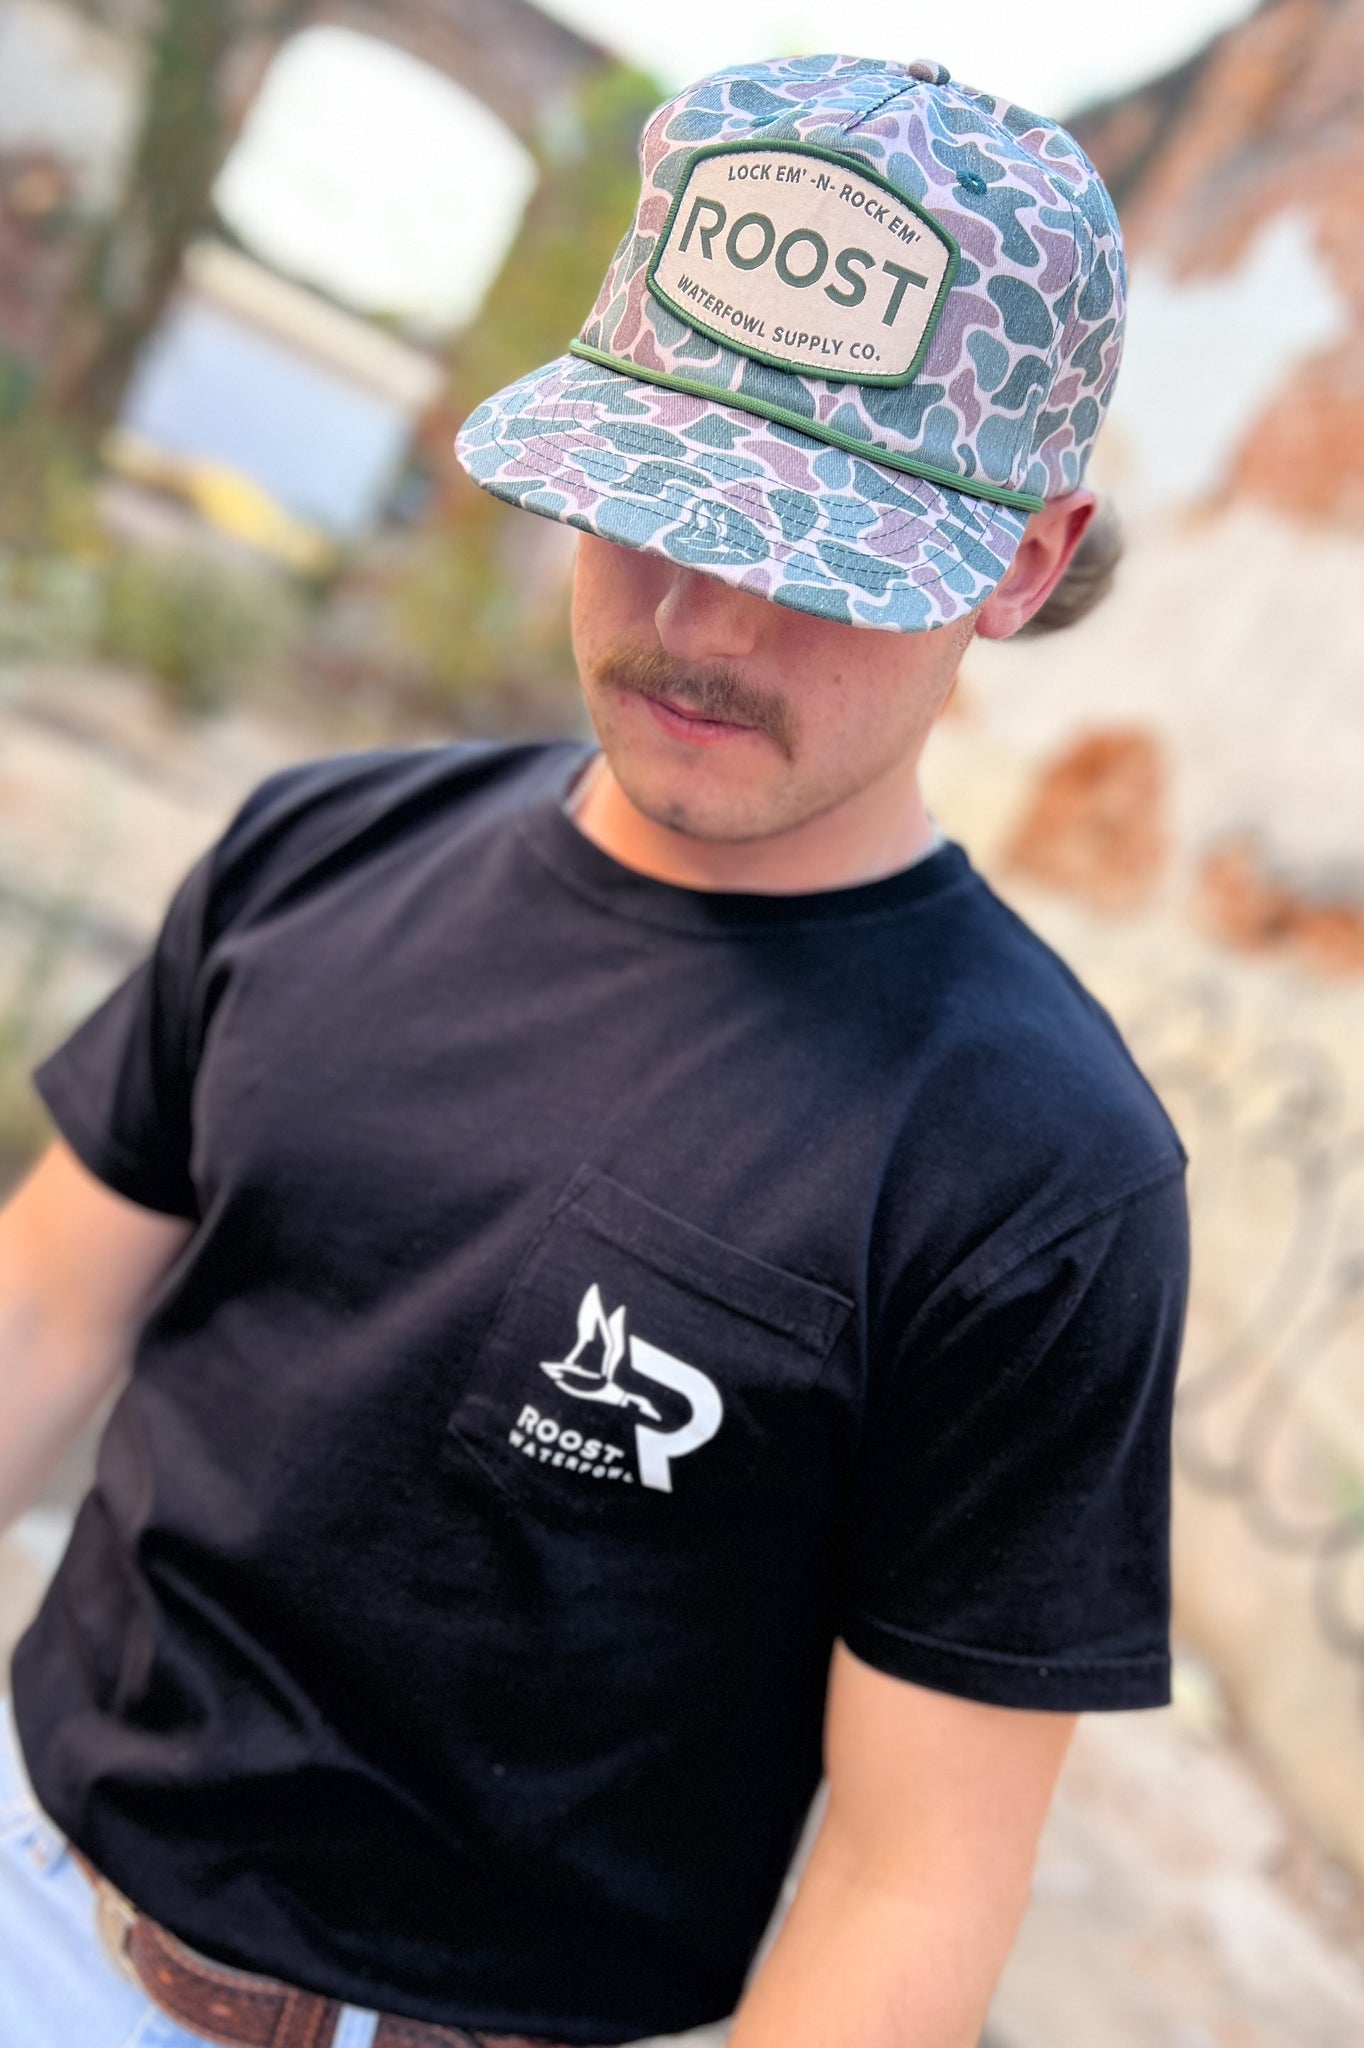 Roost Old School Camo Patch Hat